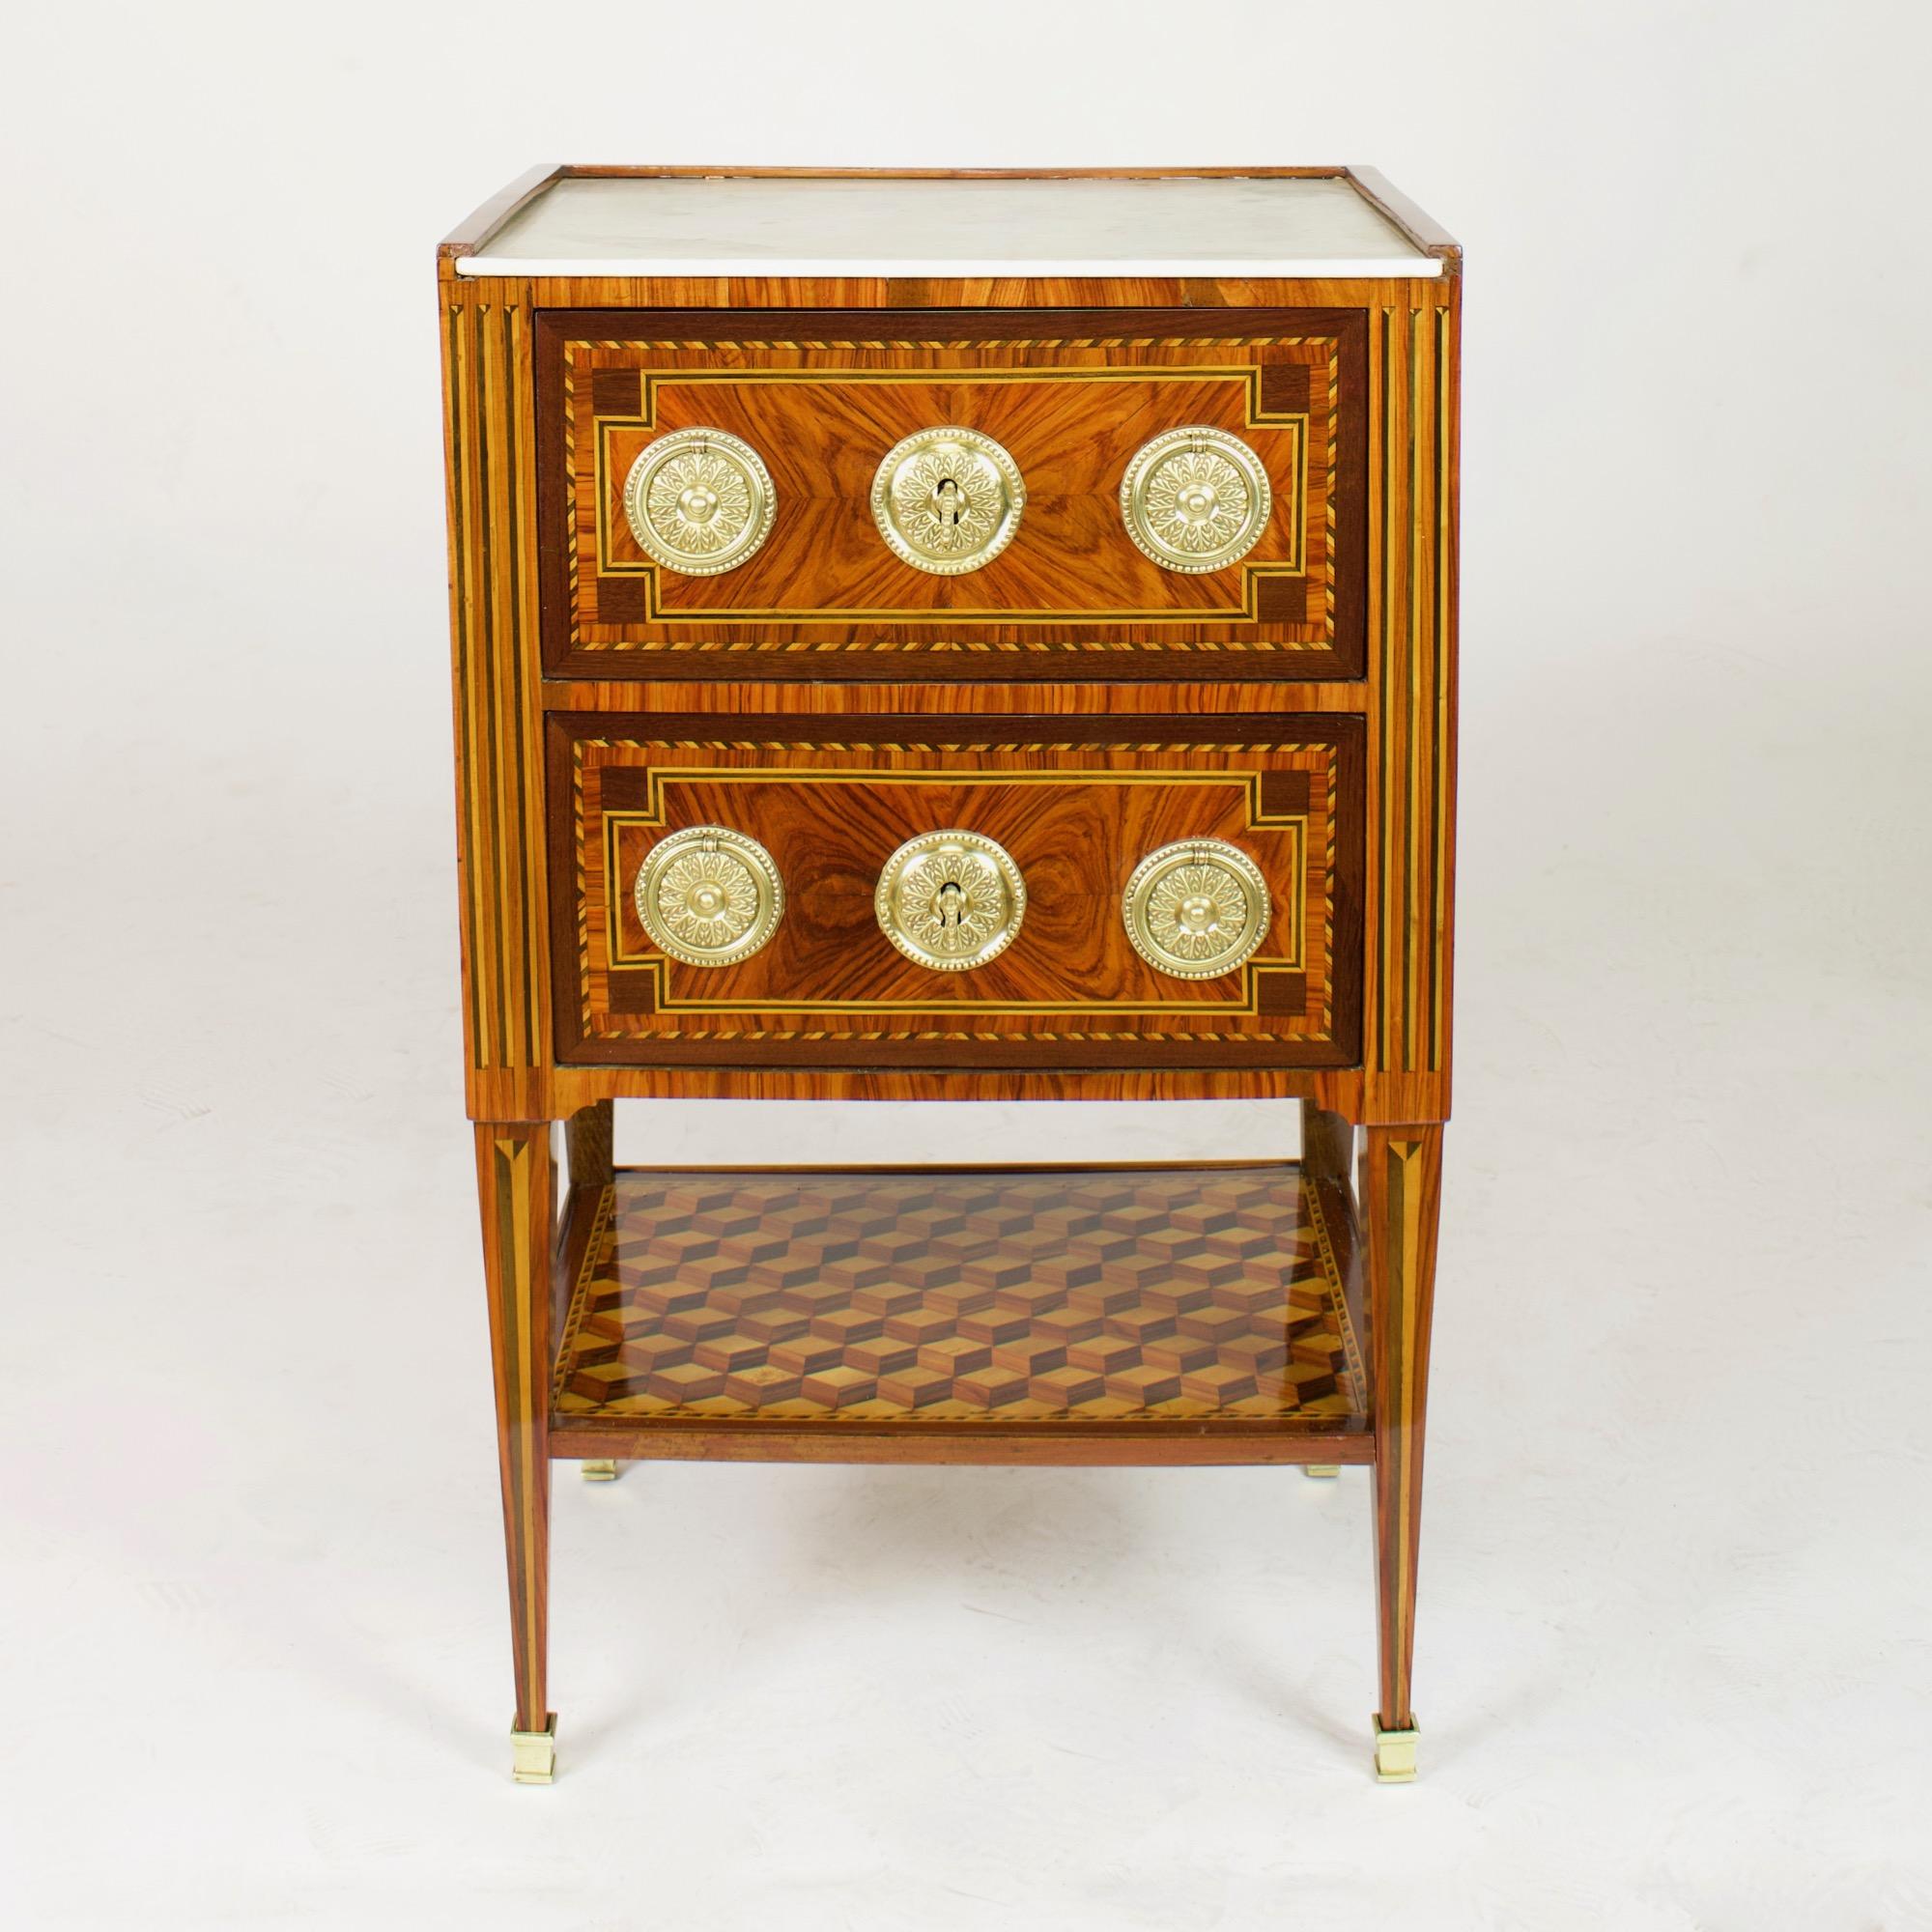 Gilt 18th Century French Small Louis XVI Marquetry Side Table or Table Chiffonière